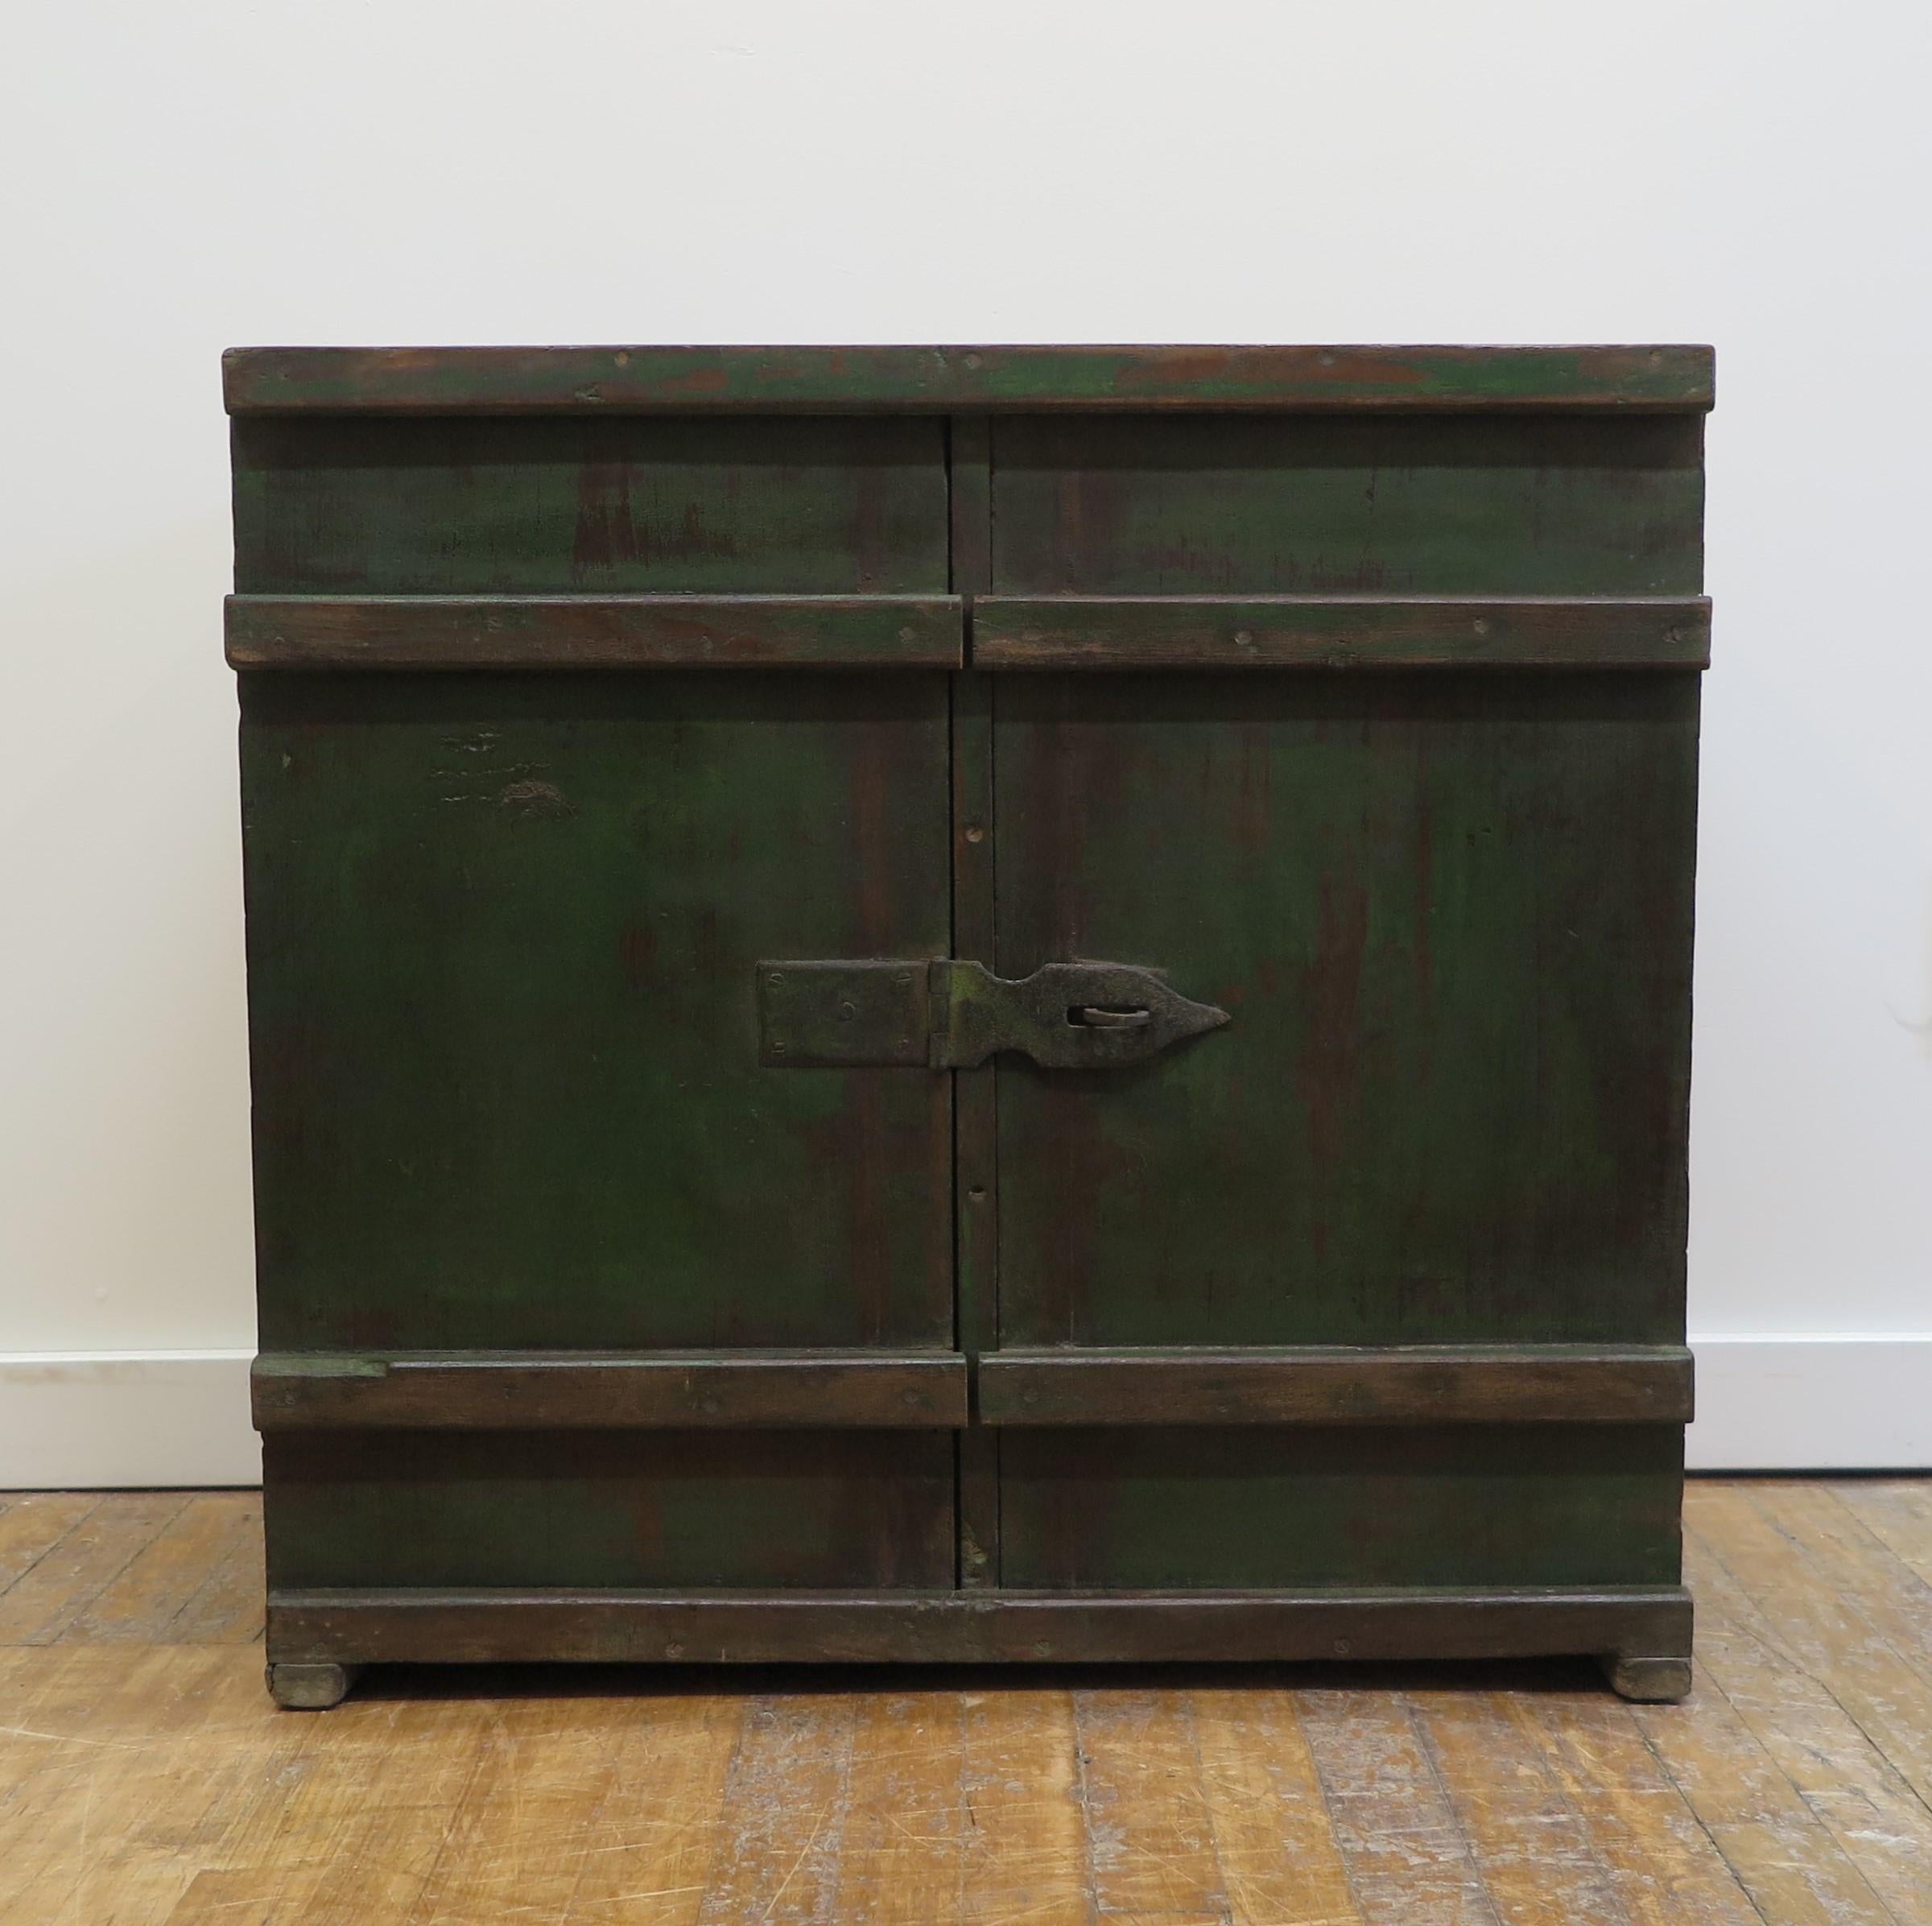 Primitive Painted Cabinet. Primitive Side Cabinet with sliding doors. Great interesting Primitive side storage cabinet with nice patina of green paint that has oxidized nicely. Hand forged iron cross over hardware centered allows you to add a lock.